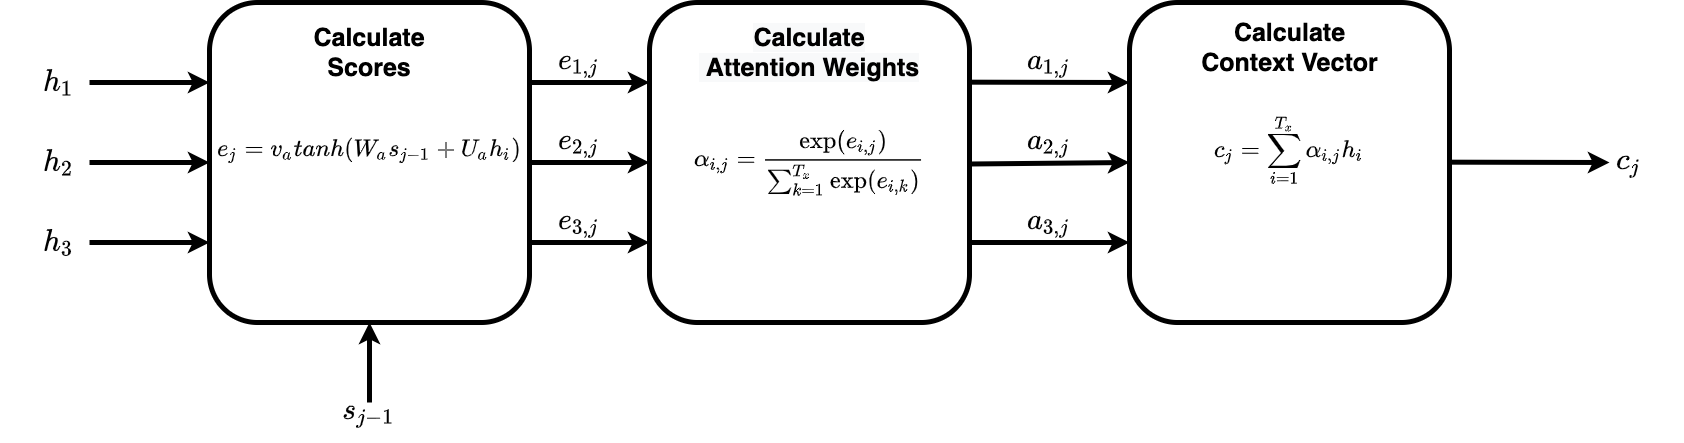 attention_calculation